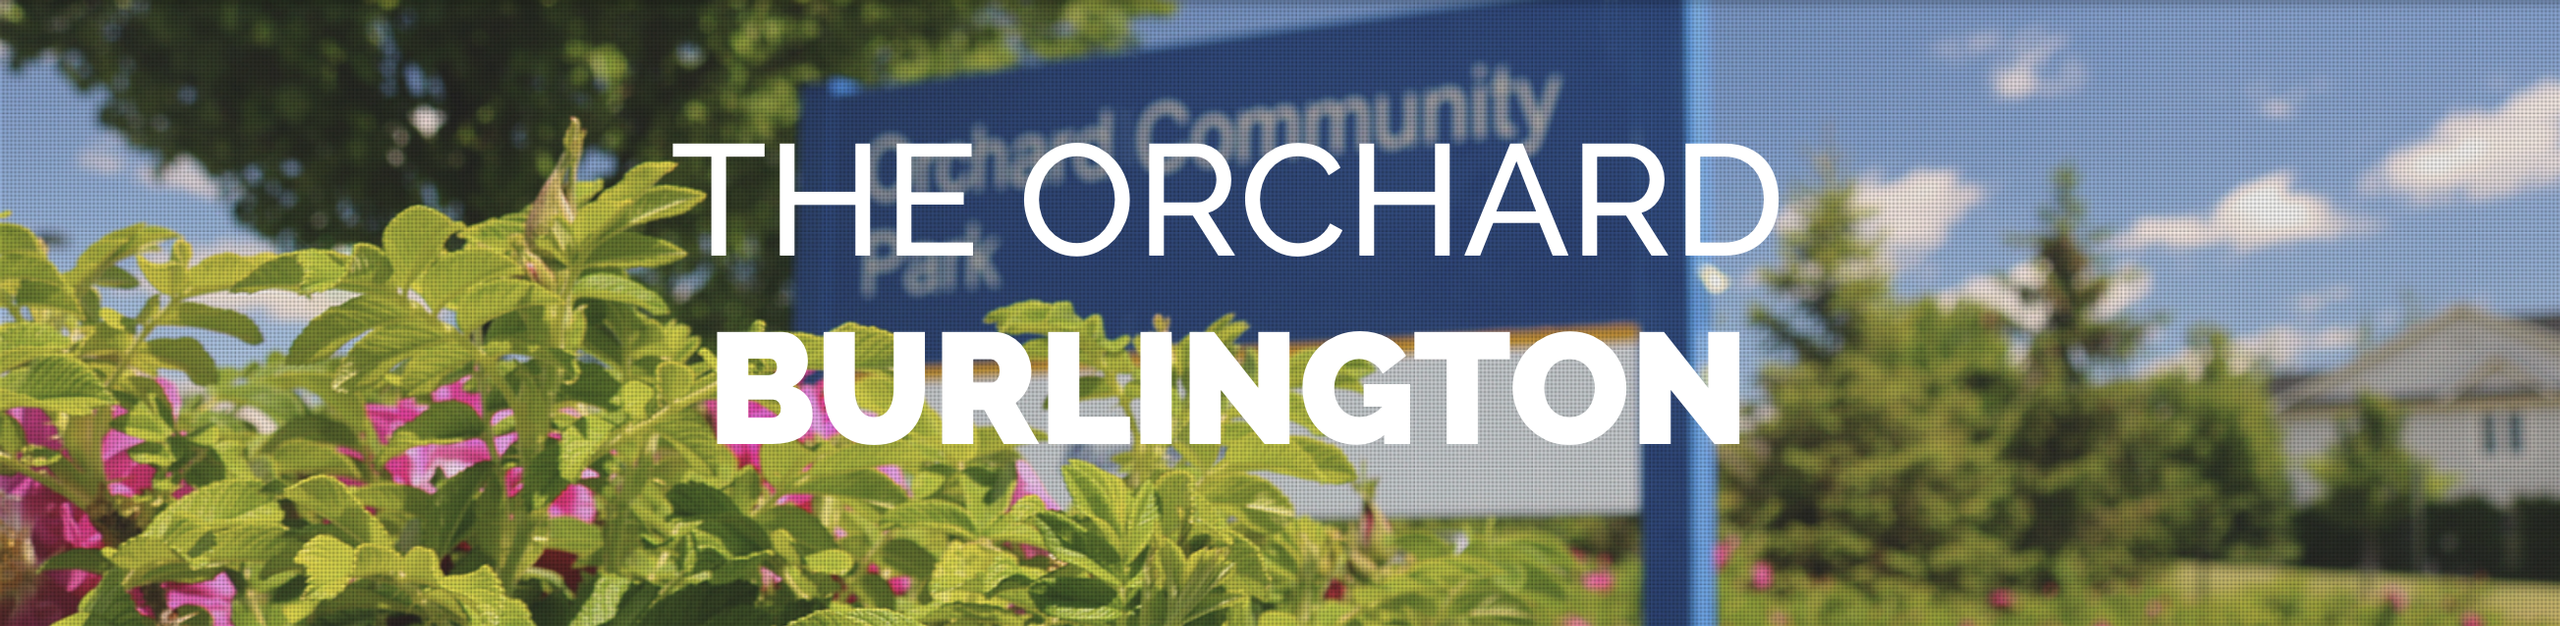 Explore Burlington - The Orchard neighbourhood with The Mink Group real estate.